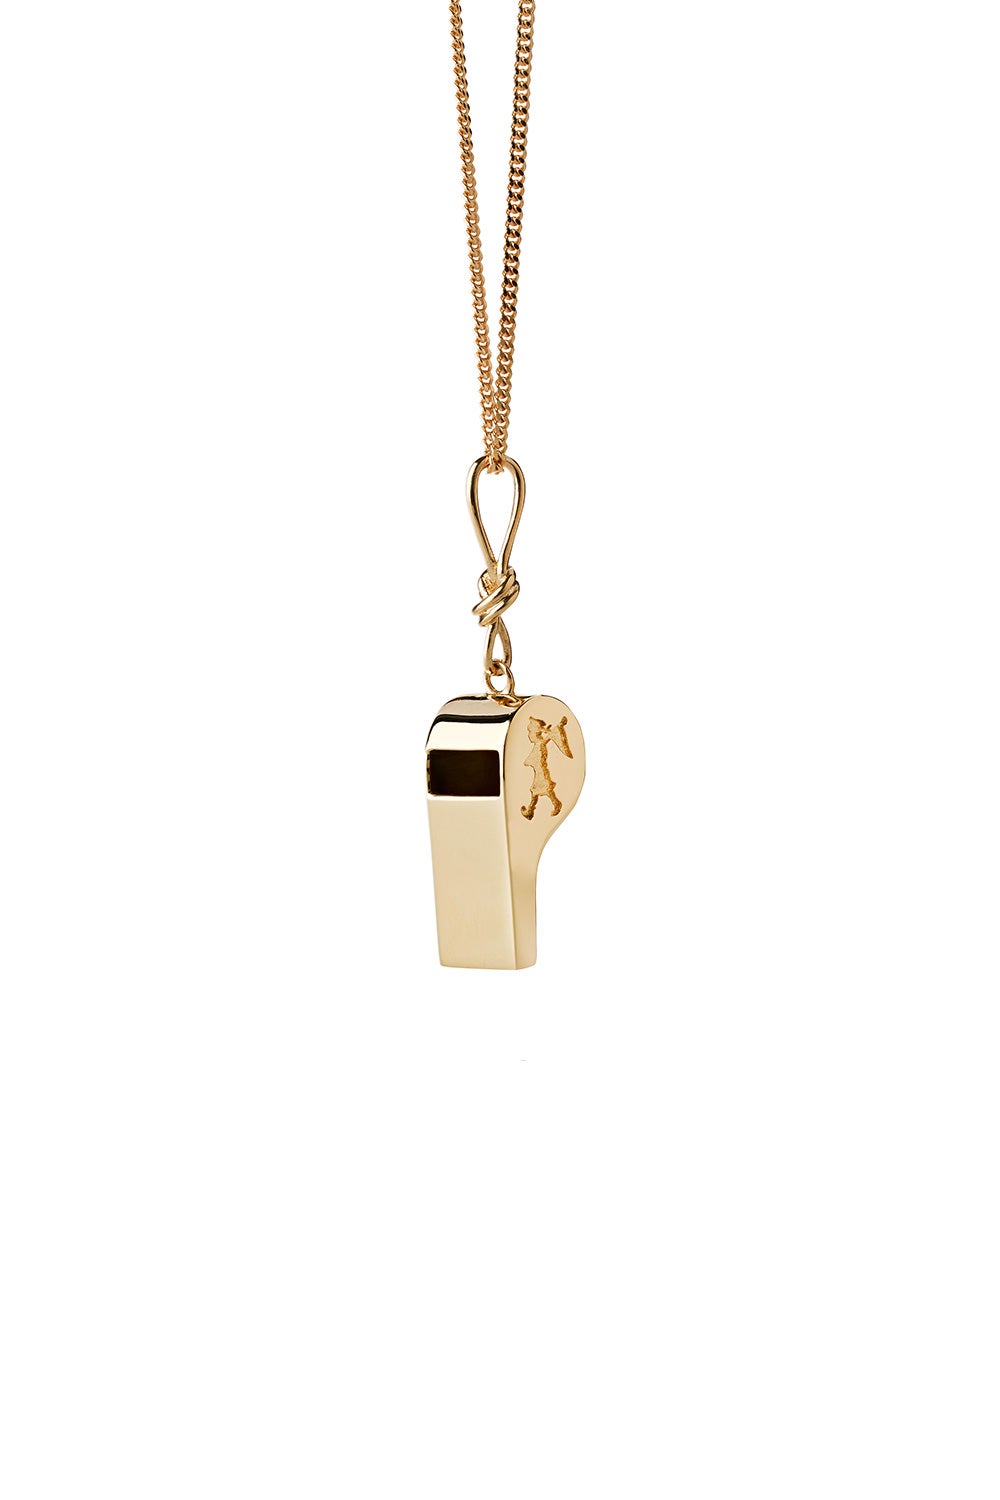 Navigator's Whistle Necklace Gold